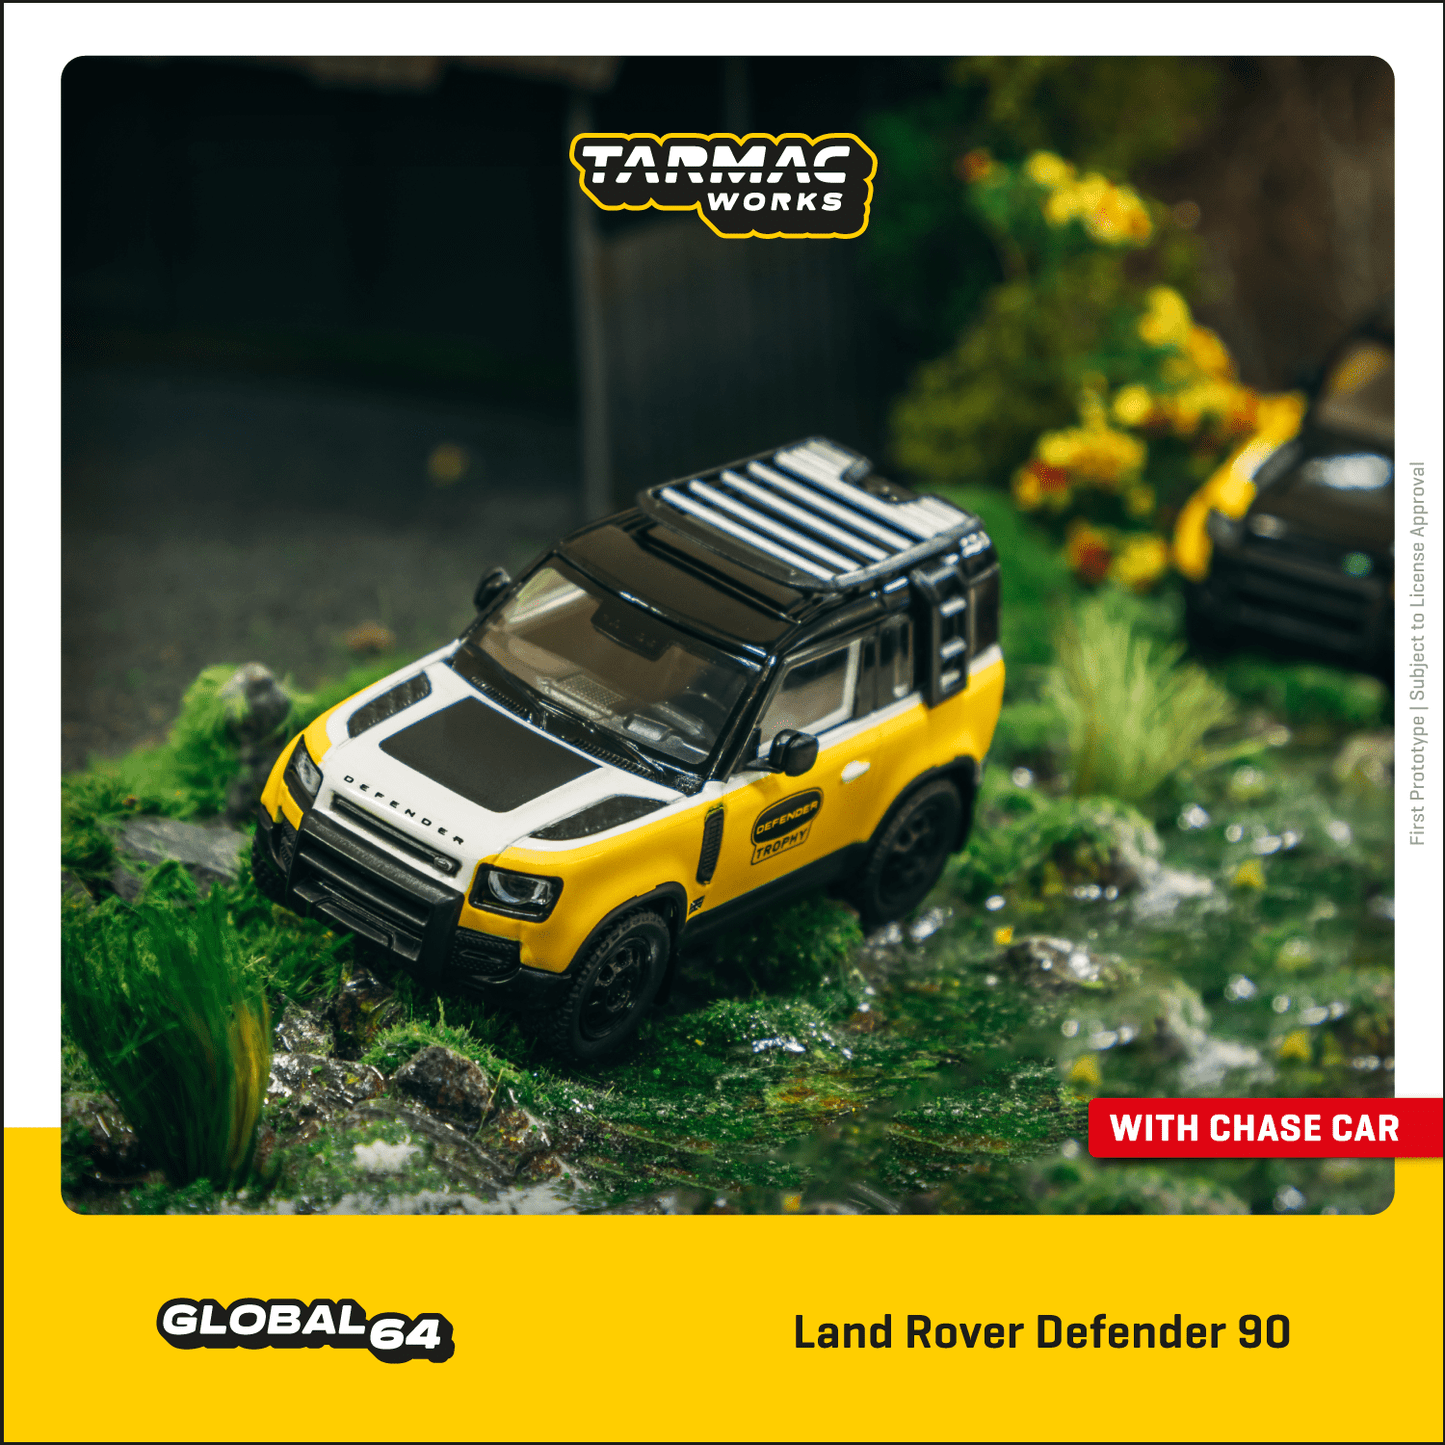 Tarmac Works 1:64 Scale Land Rover Defender 90 Trophy Edition